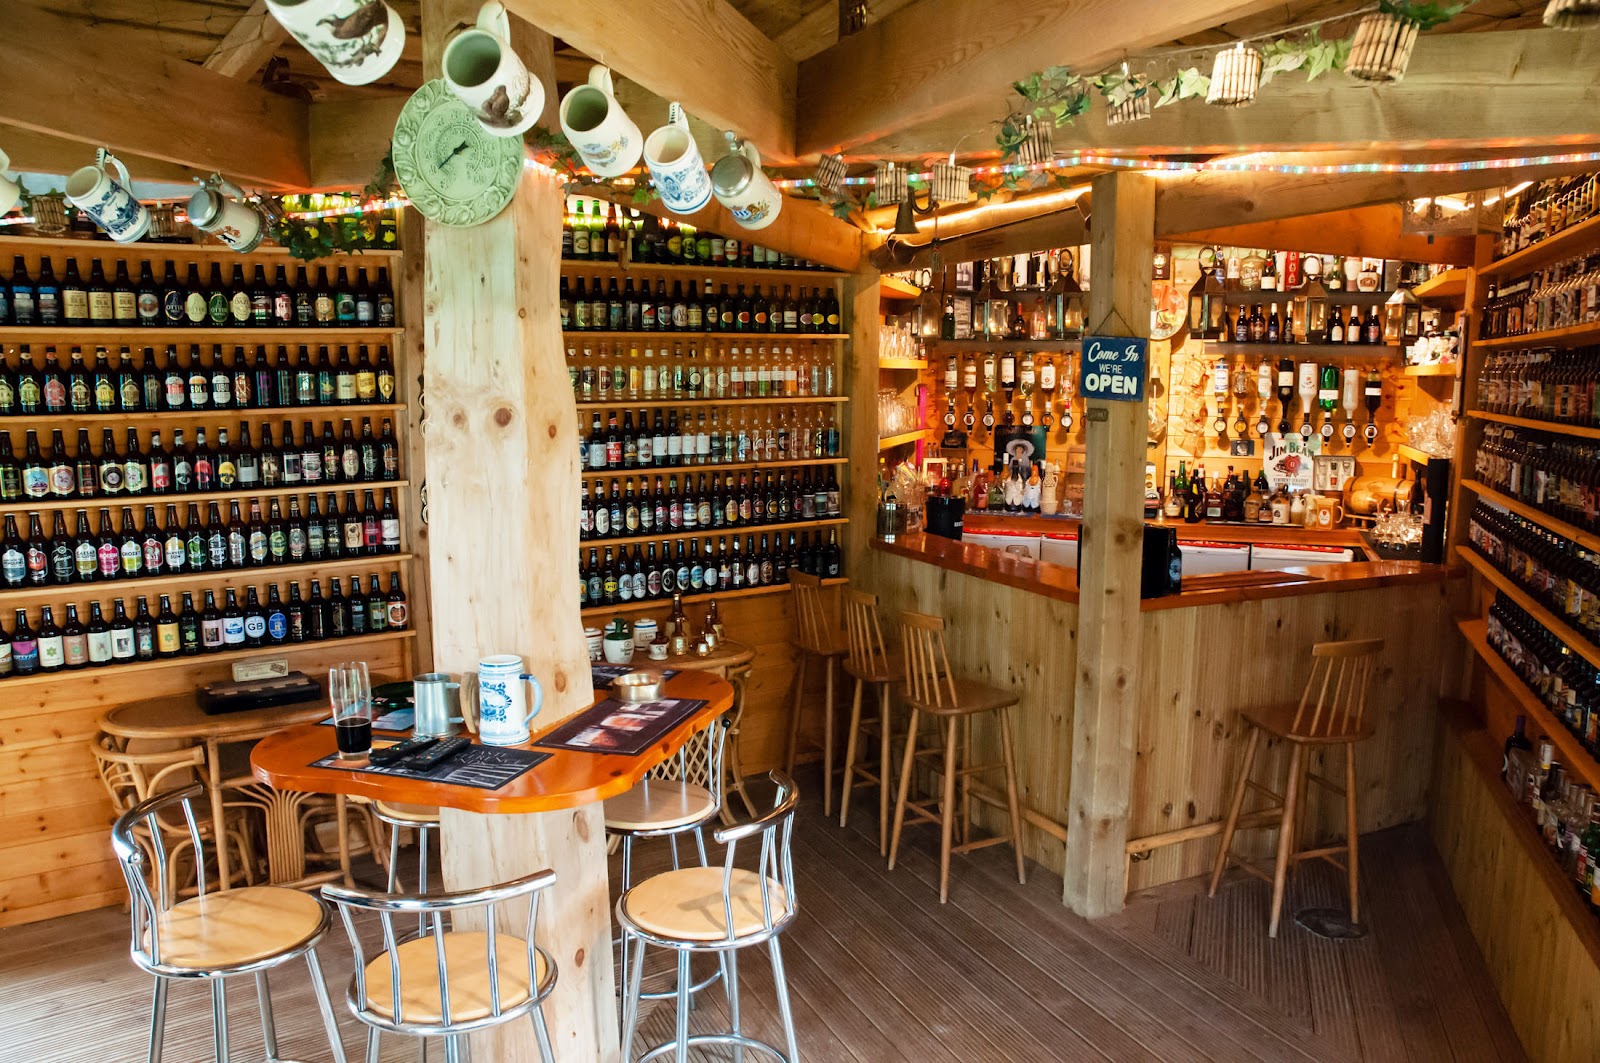 Shedworking: Woodhenge pub shed wins Shed of the Year 2012